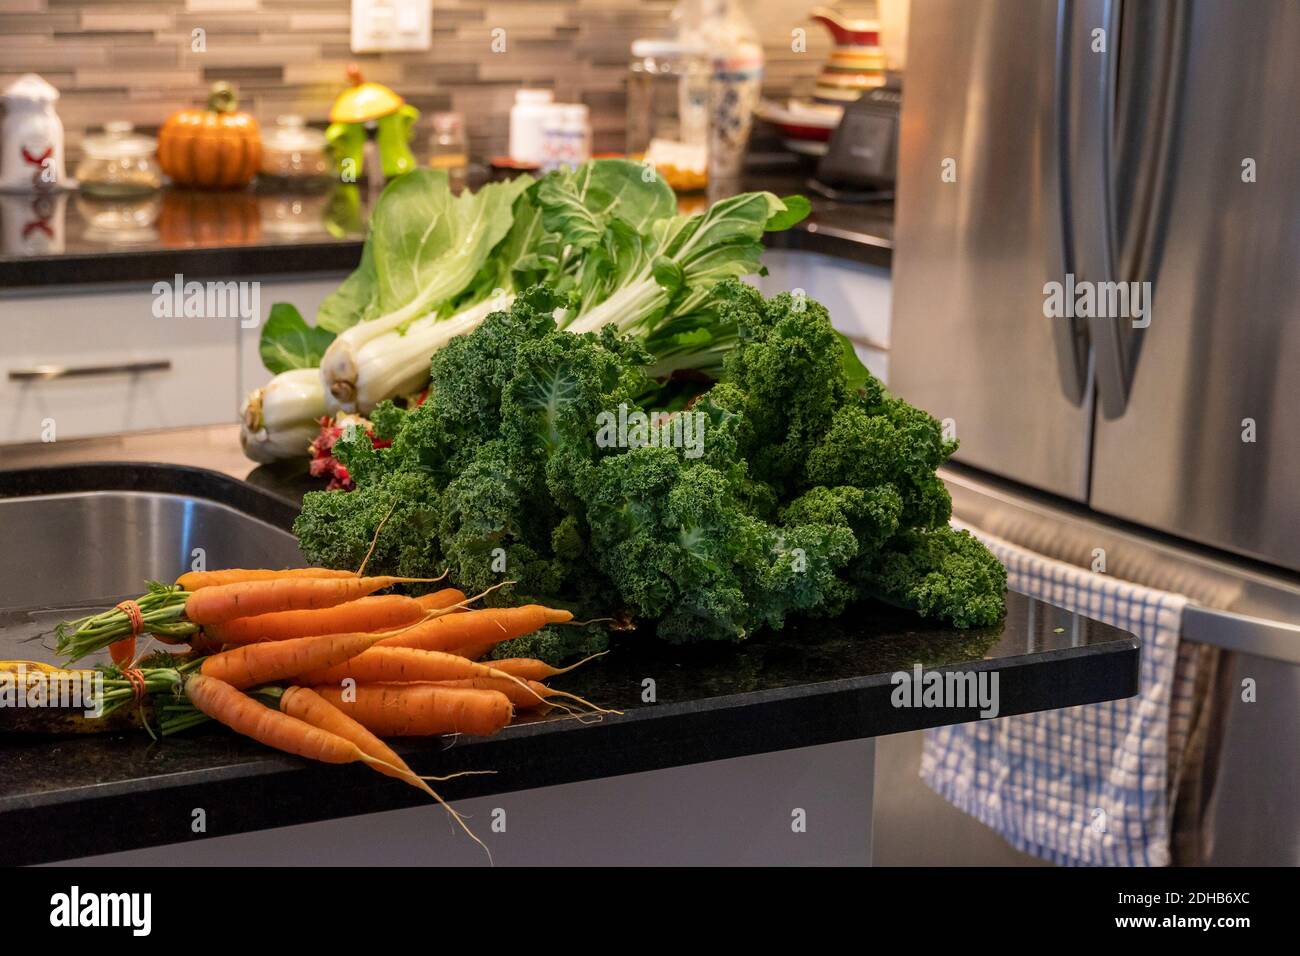 Vegetables from the bazaar lie on a marble black table in the kitchen Stock Photo